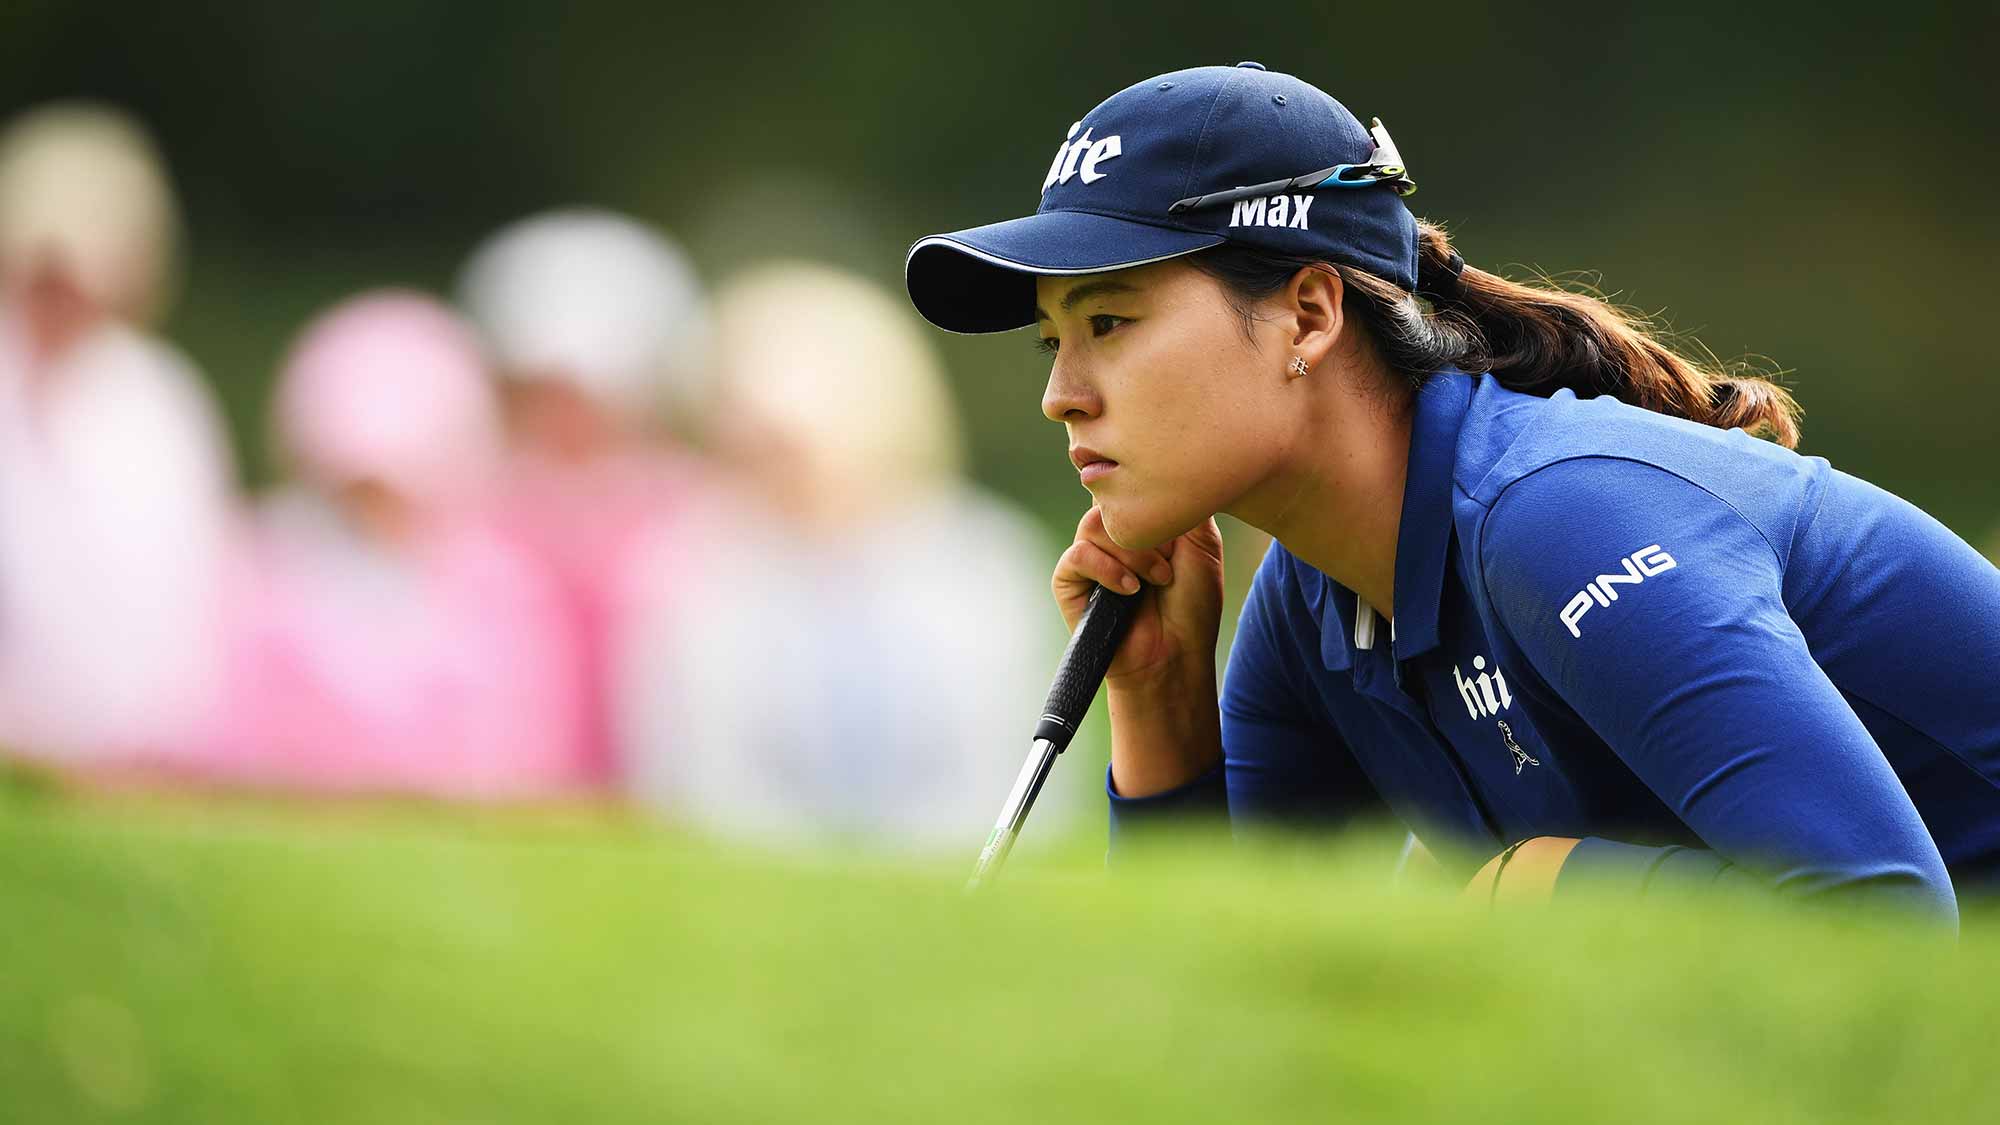 In Gee Chun of Korea lines up a putt during the second round of The Evian Championship